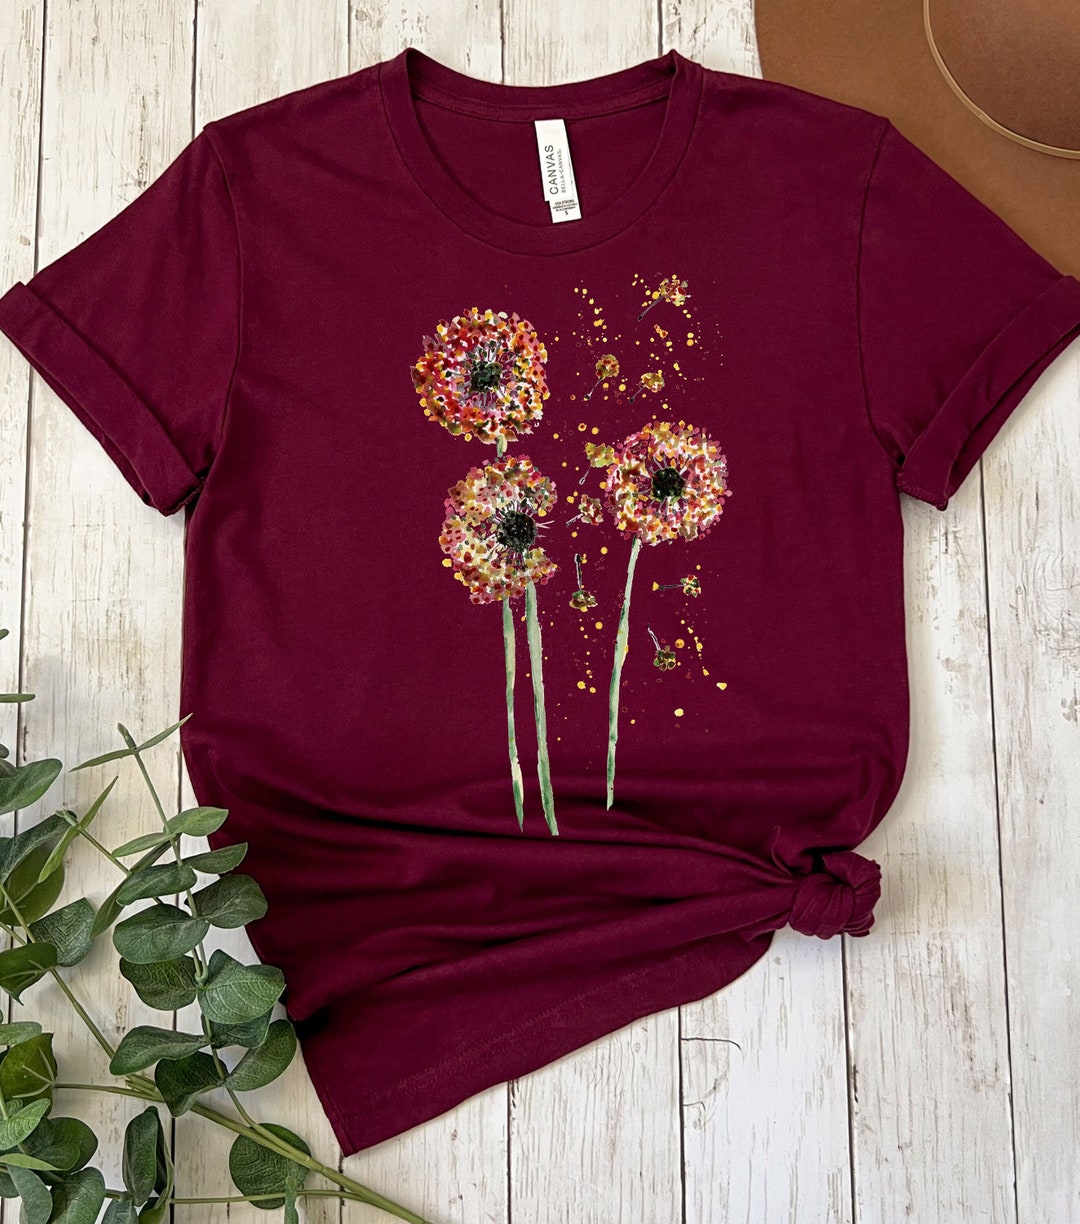 Colorful Flower Tee, Shirt With Flowers, Flower Shirt, Graphic Tee ...